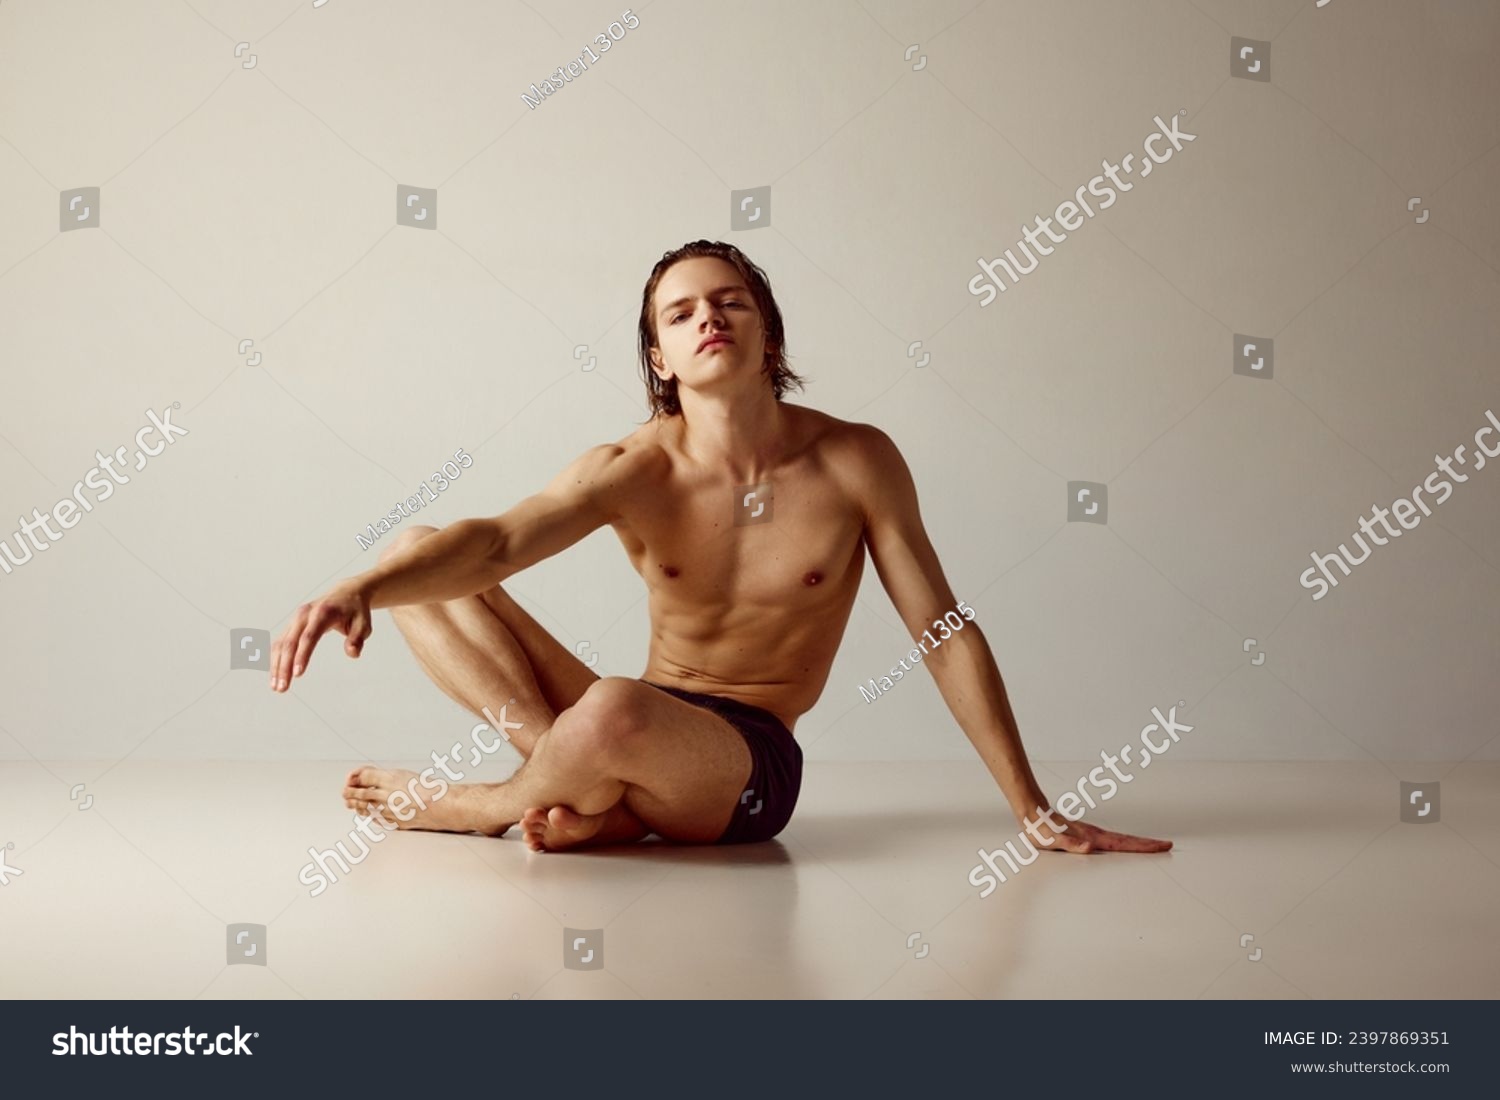 Handsome young guy with sportive, muscular body sitting on floor, posing shirtless in underwear against grey studio background. Concept of men's beauty, health, body care, sportive lifestyle #2397869351